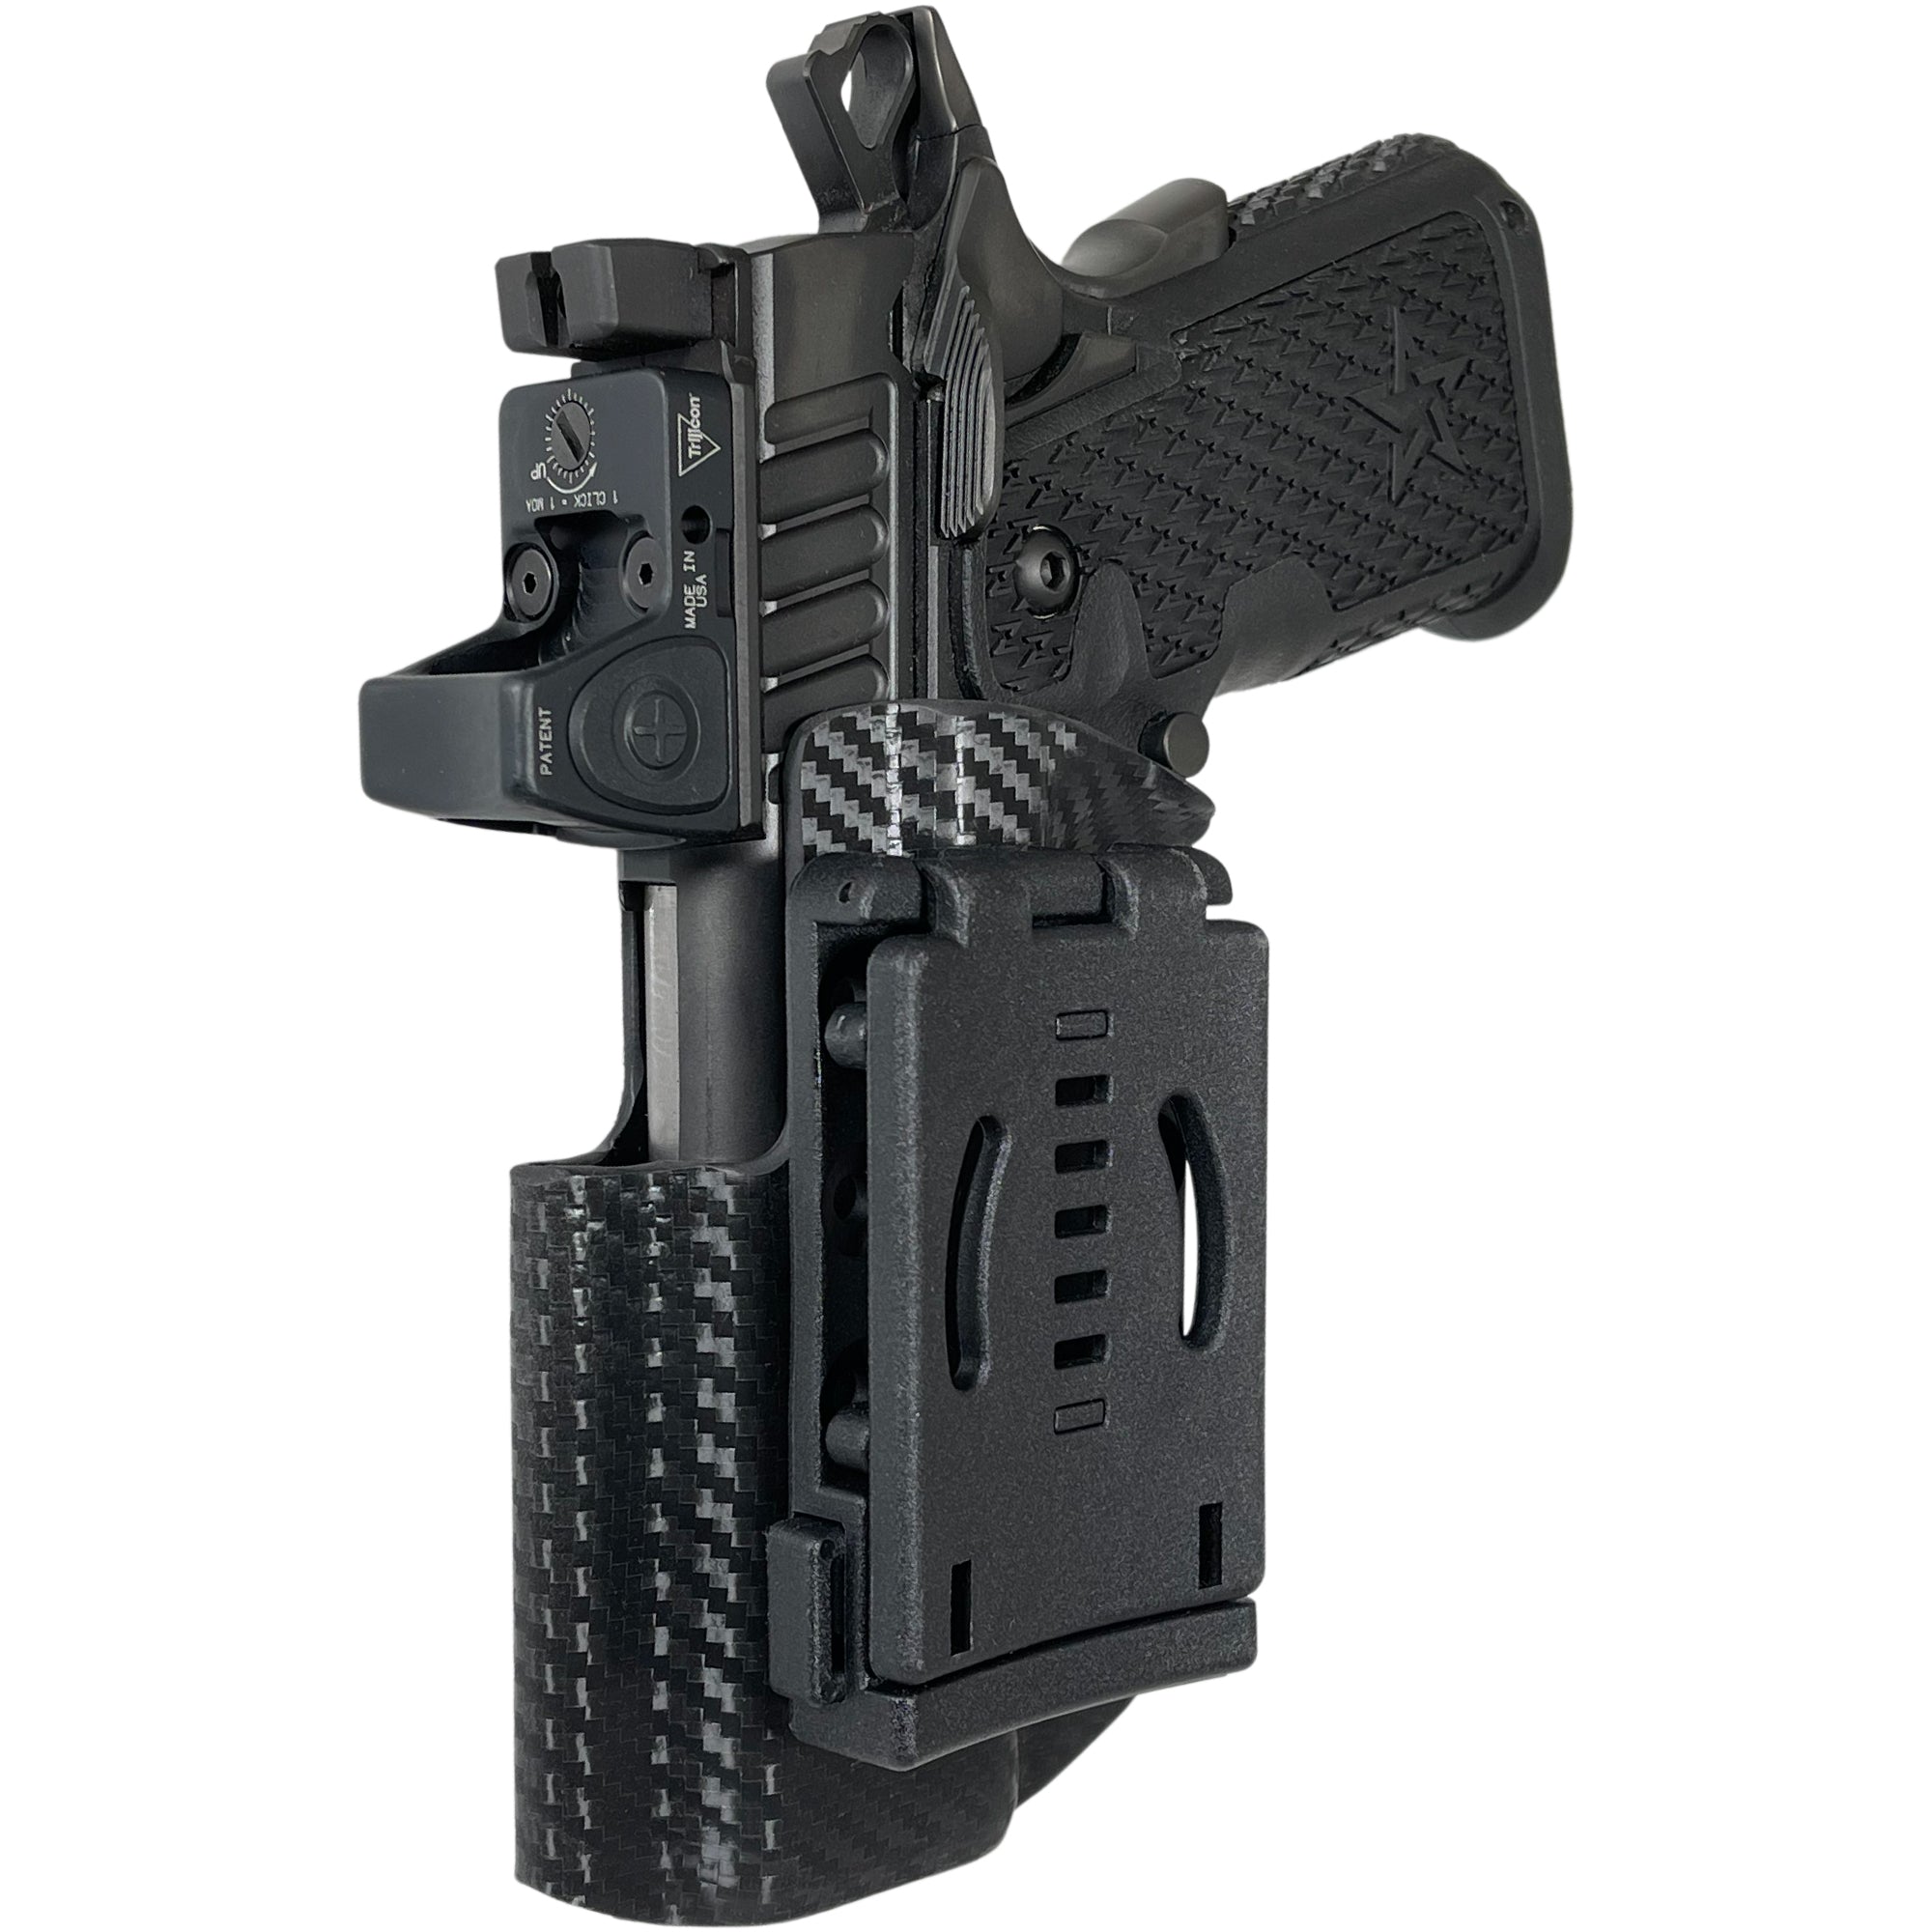 Staccato C2 Pro IDPA Competition Holster